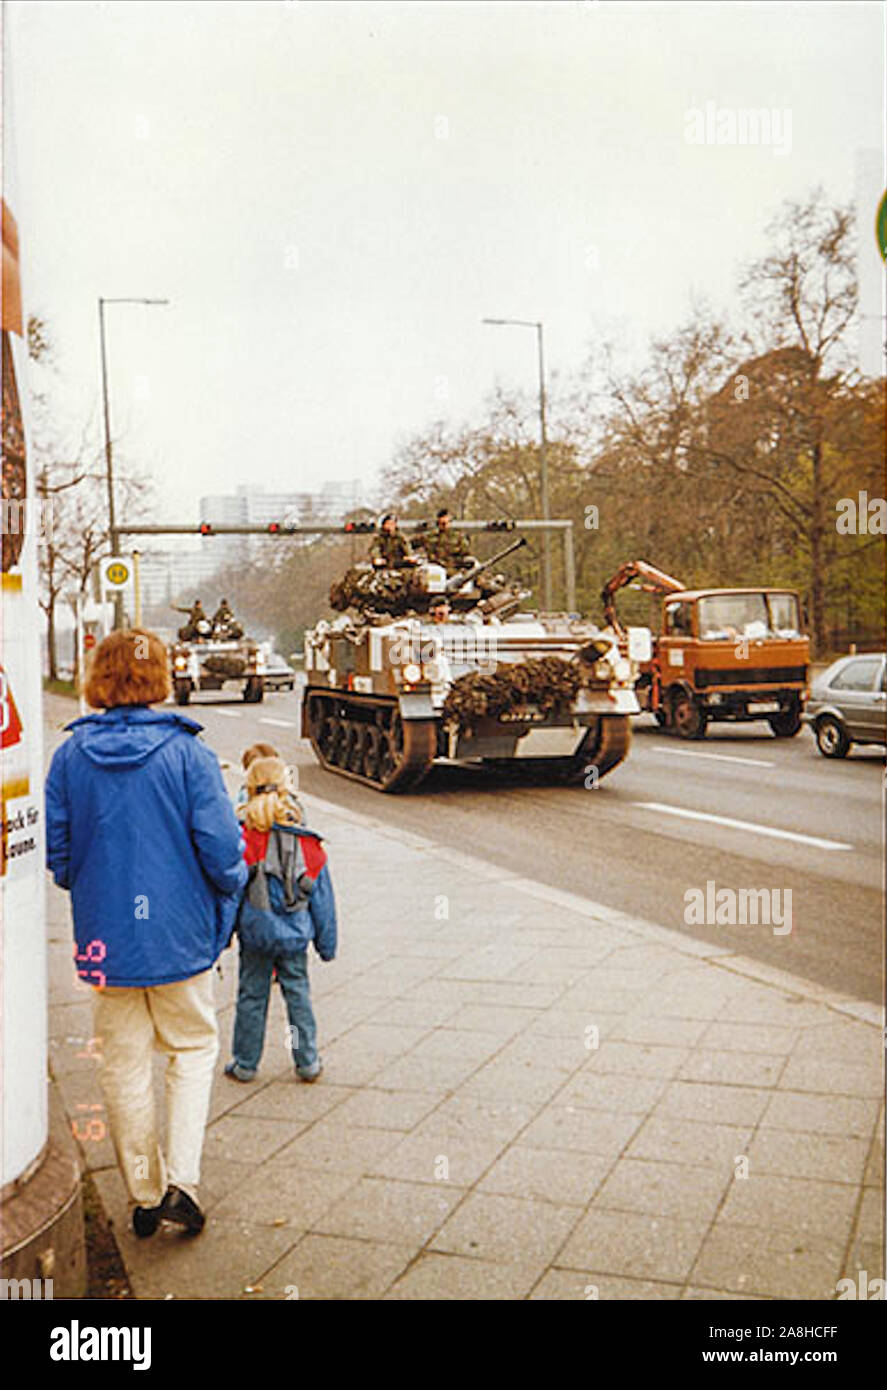 Michael Scott/Alamy Live News - Berlin, Germany April 1990 - British Army tanks roll through West Berlin in April 1990 just months after the Berlin Wall fell in 1989. Stock Photo